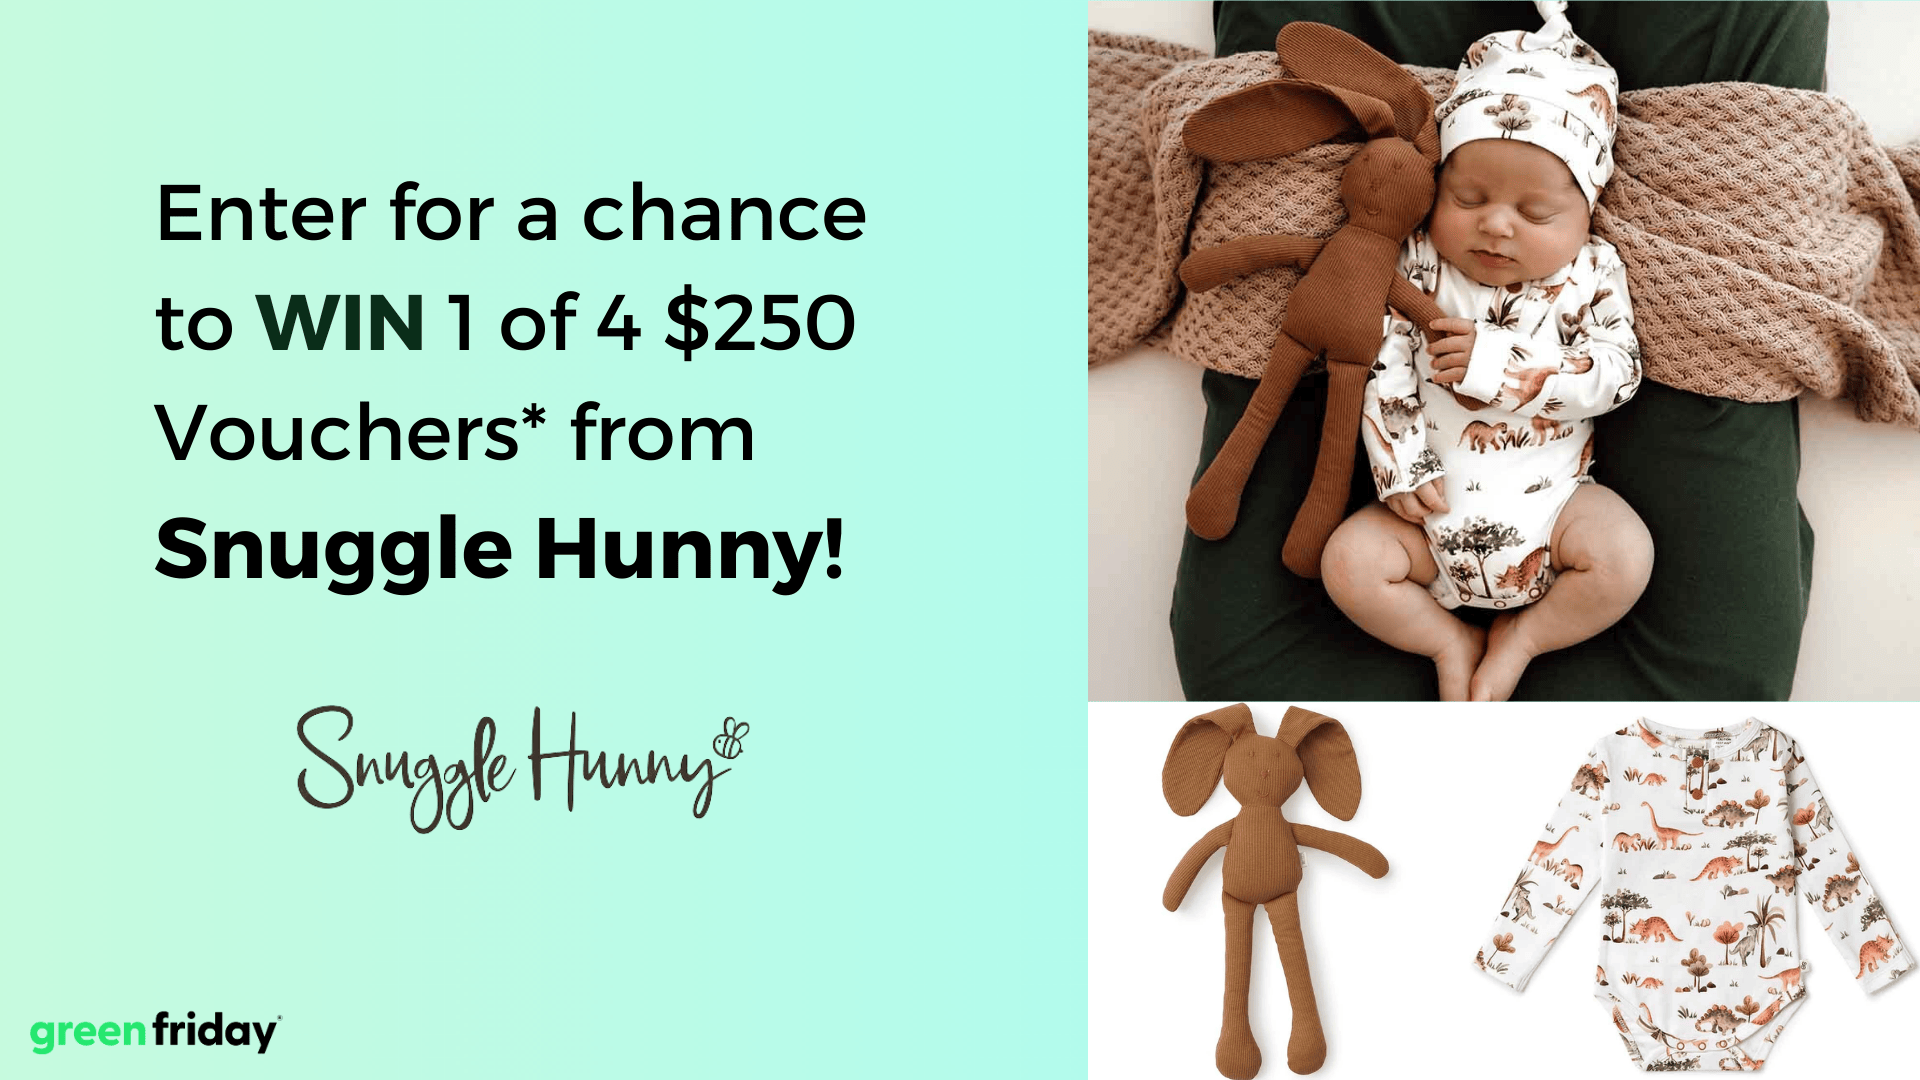 Enter for a chance to WIN 1 of 4 x $250 Snuggle Hunny Vouchers* (TBC)